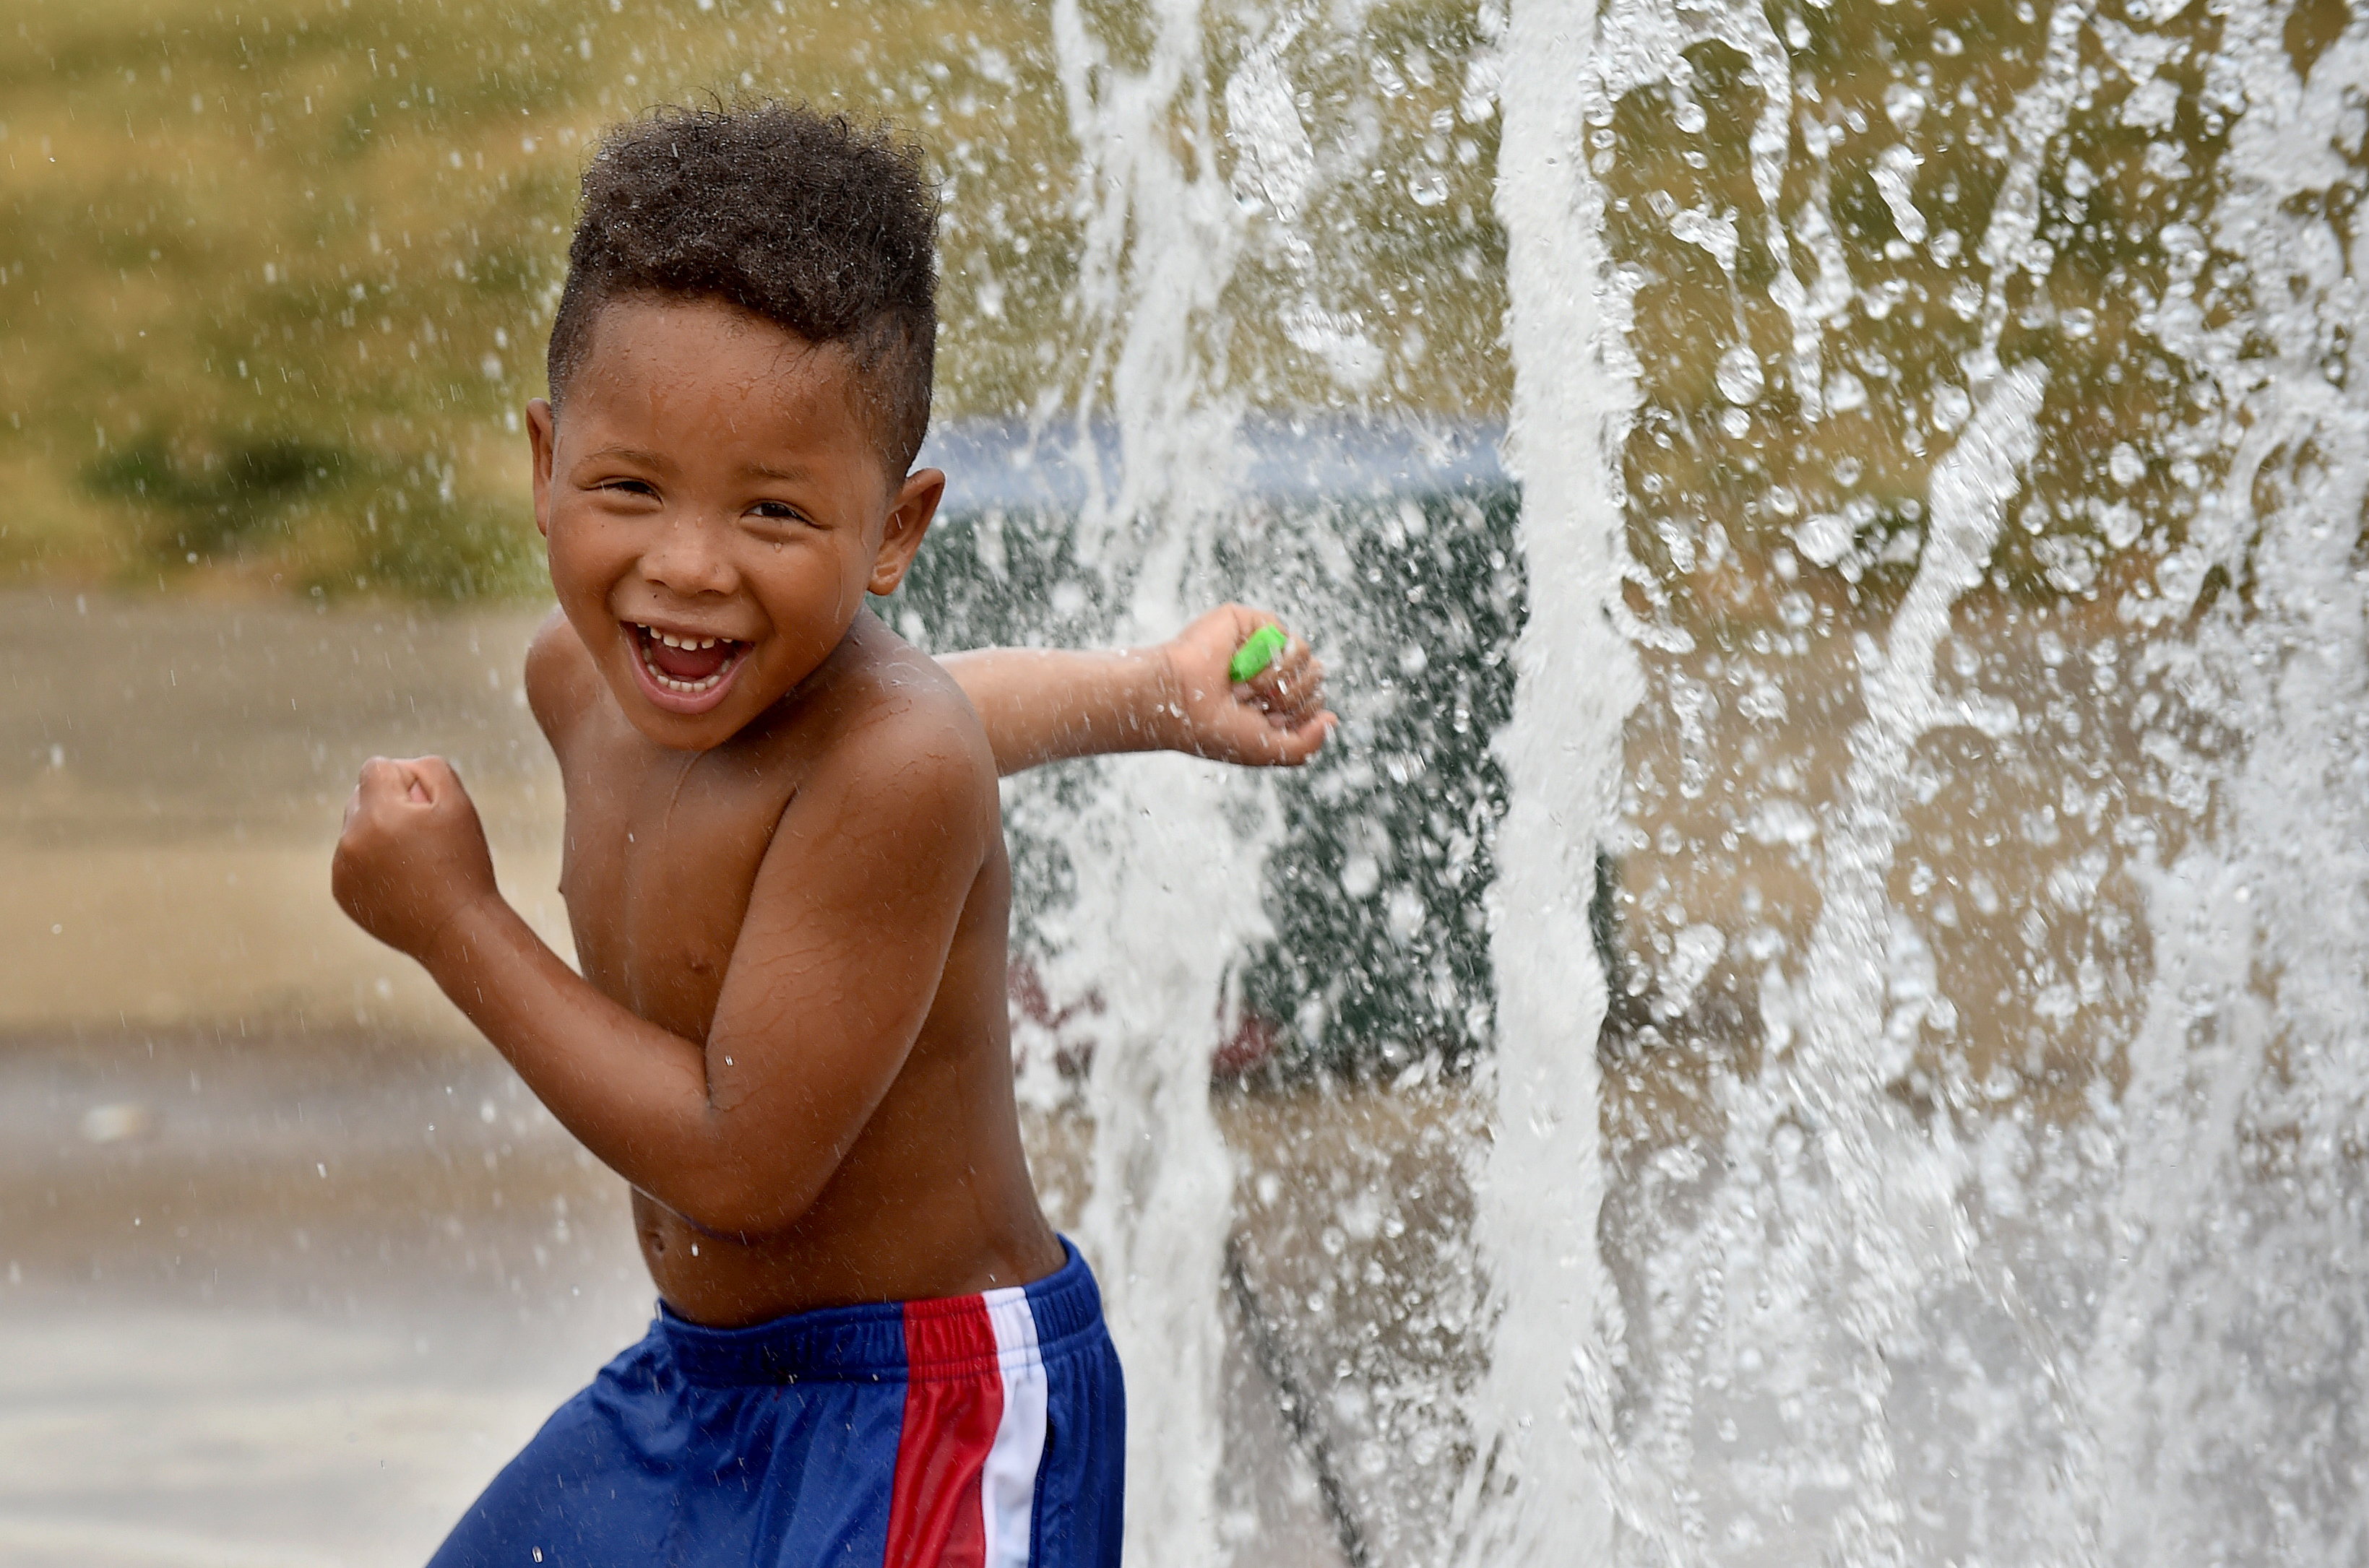 People are still looking for a way to cool down during a heat spell in Syracuse, July 8, 2020. These kids head to the spray area at Union Park on the city's north side. Laythaniel DeJesus 4 runs through a fountain without getting his face wet.  Dennis Nett | dnett@syracuse.com